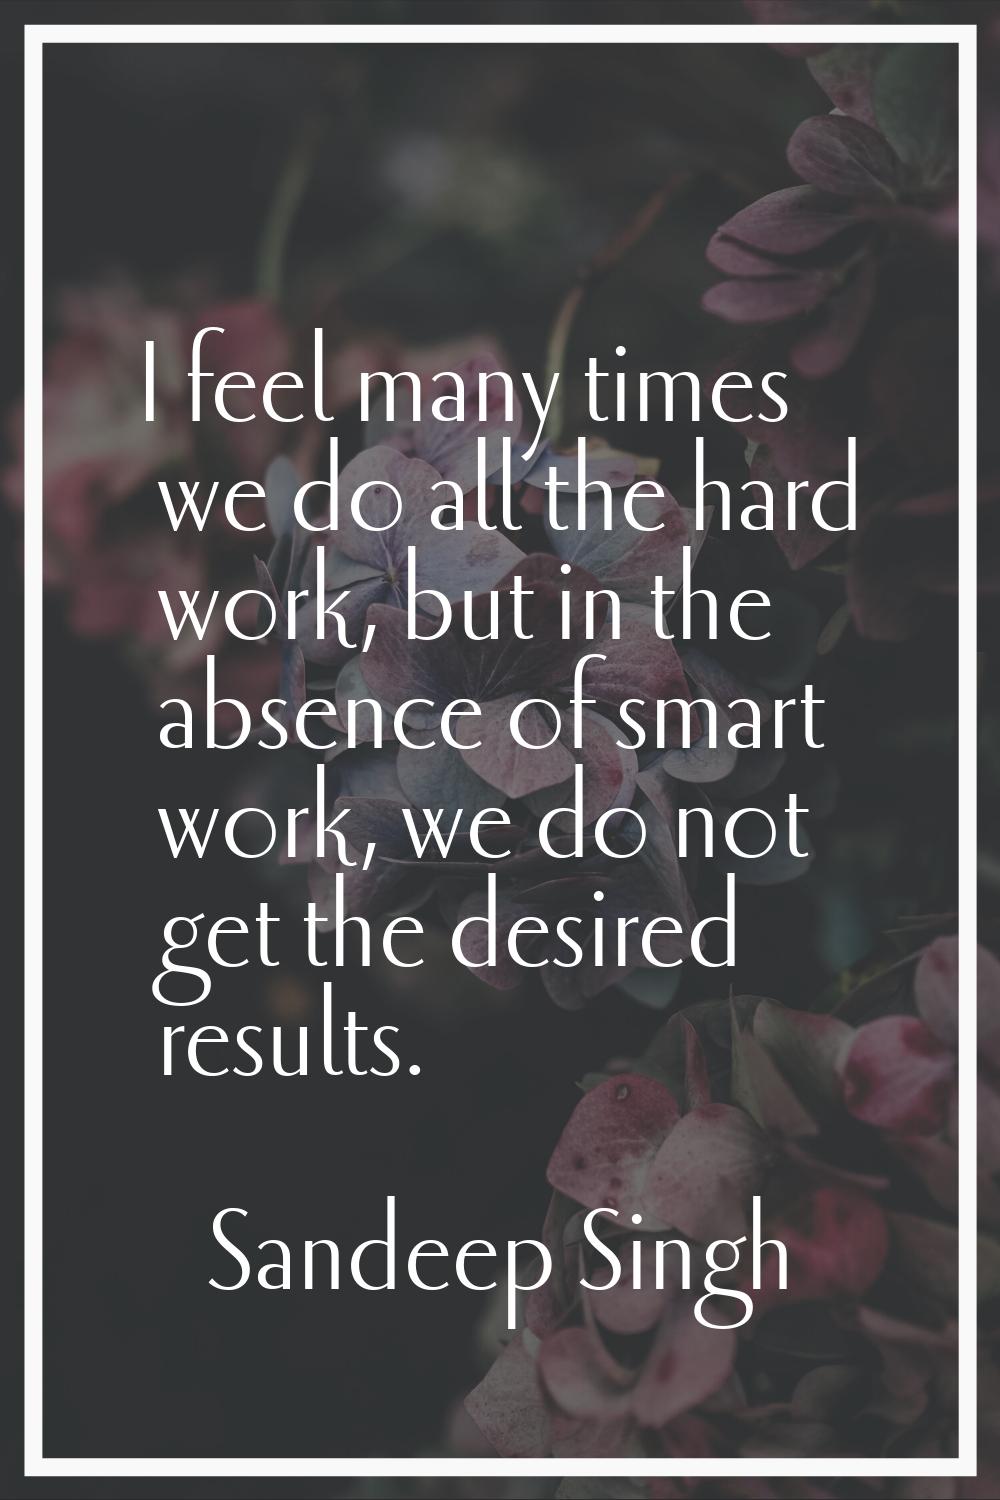 I feel many times we do all the hard work, but in the absence of smart work, we do not get the desi